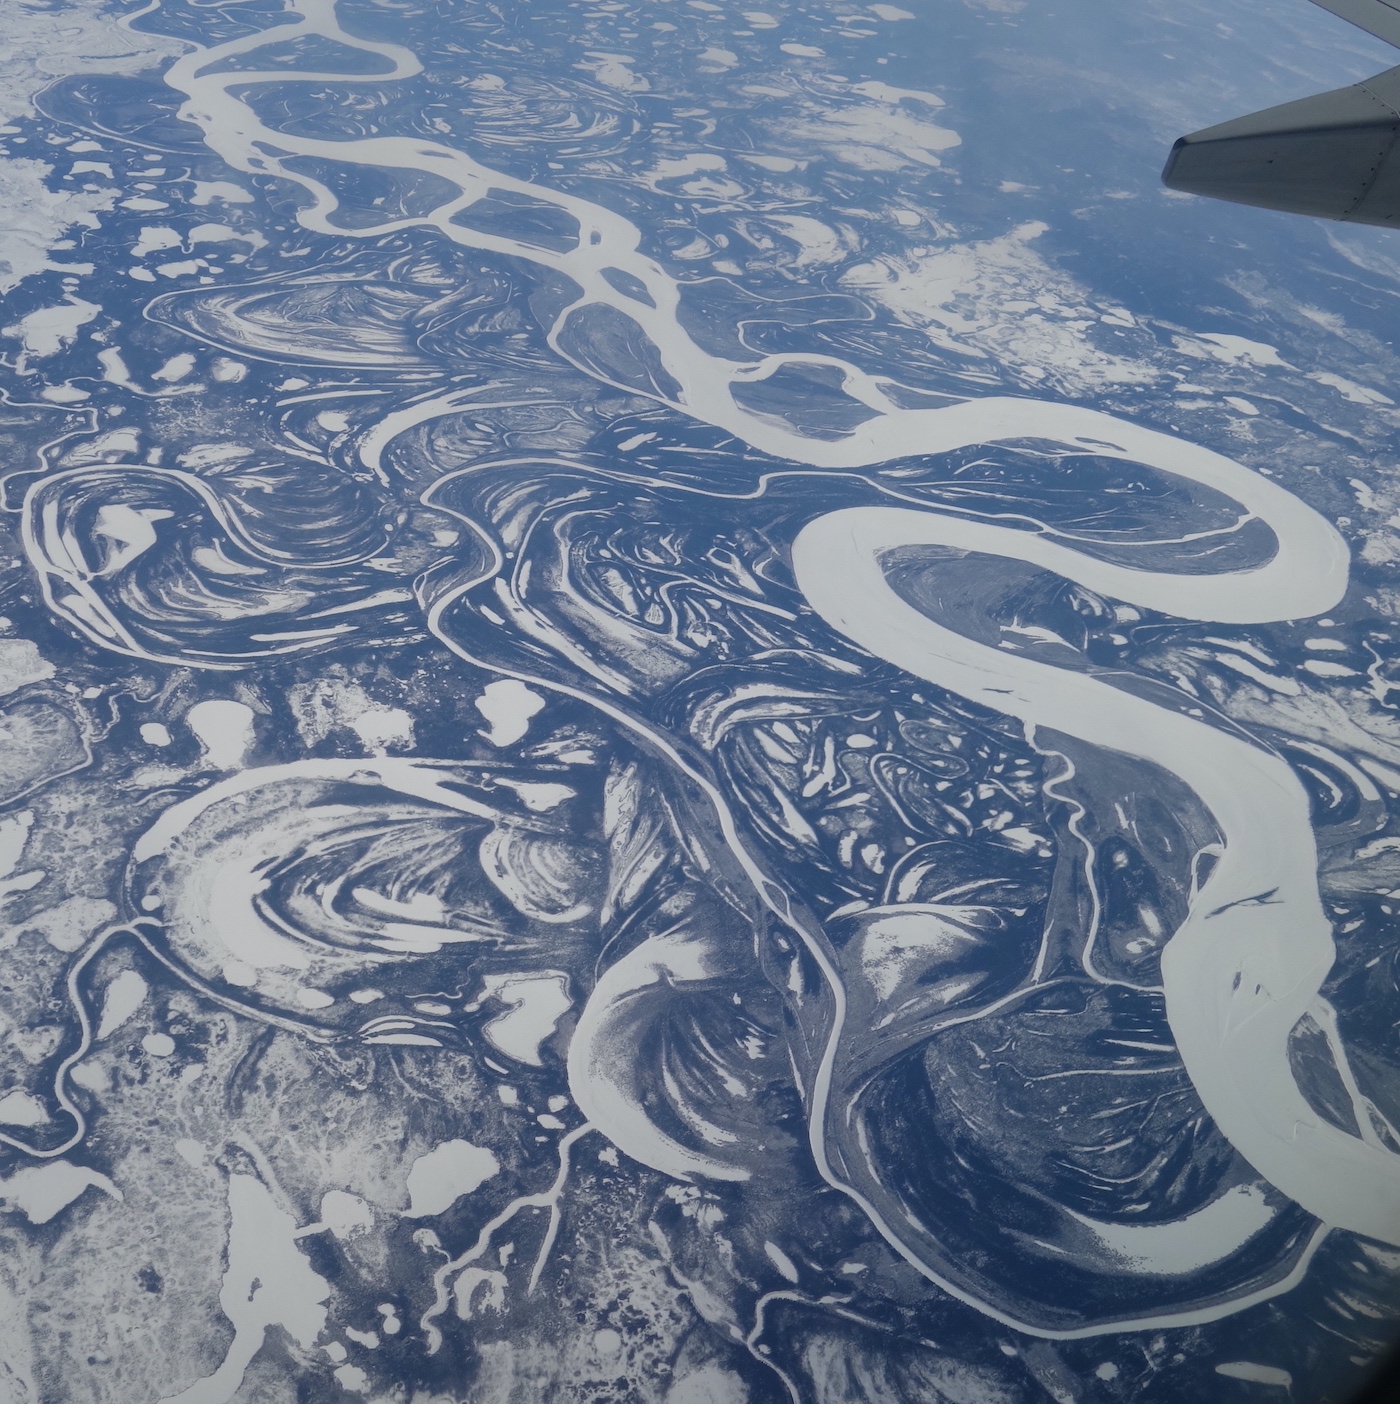 In an aerial photo, a large snow-covered frozen river and its associated sloughs wind through a flatland of spruce forest marked with willow-covered sandbars, sedge swamps, ponds and oxbow lakes.